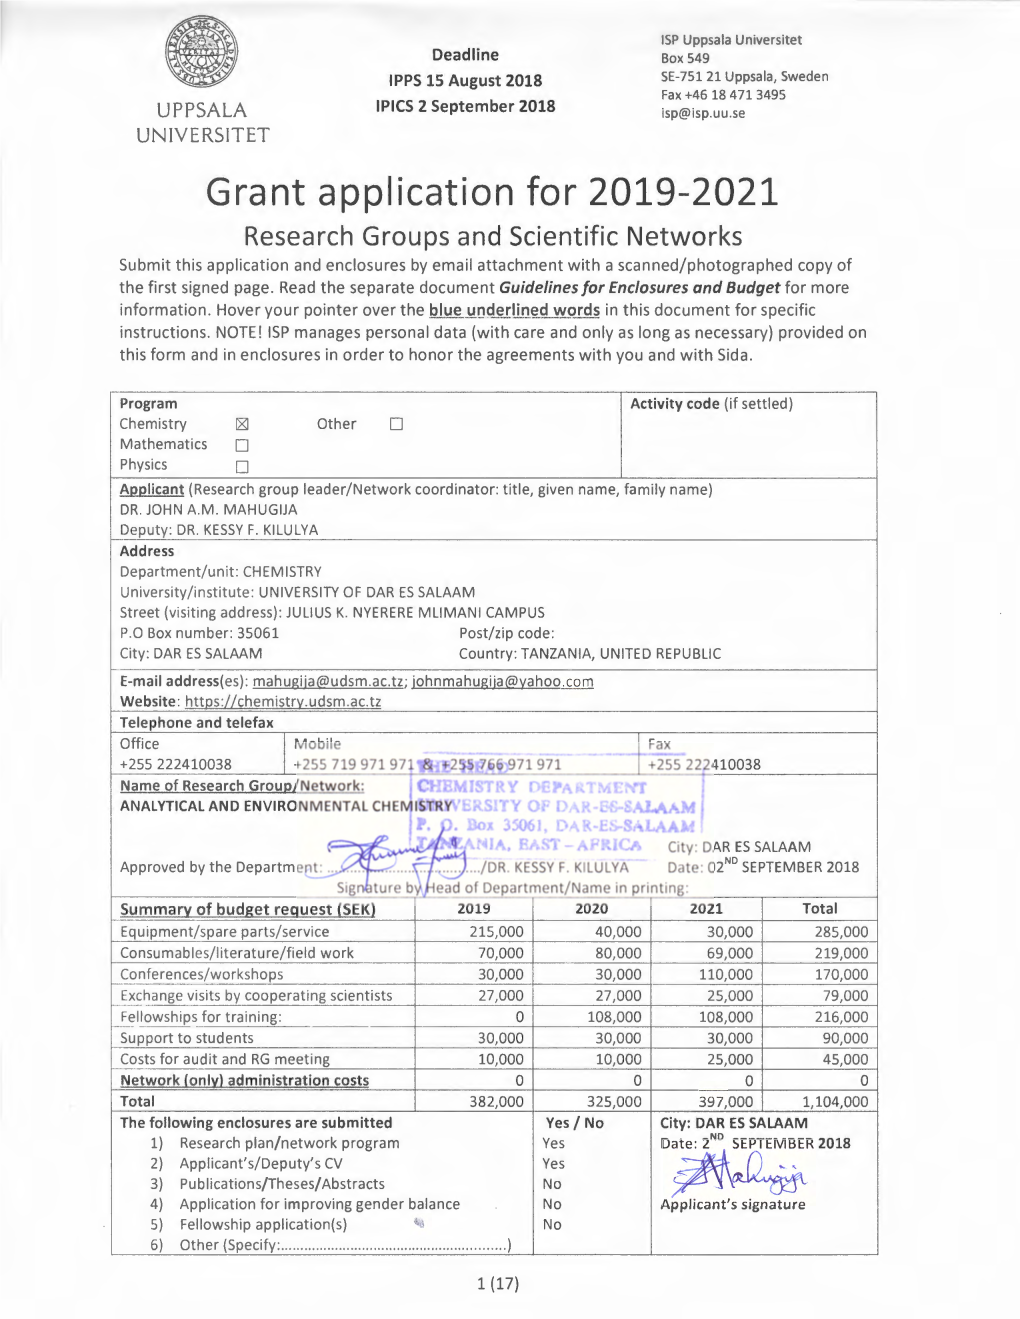 Grant Application for 2019-2021